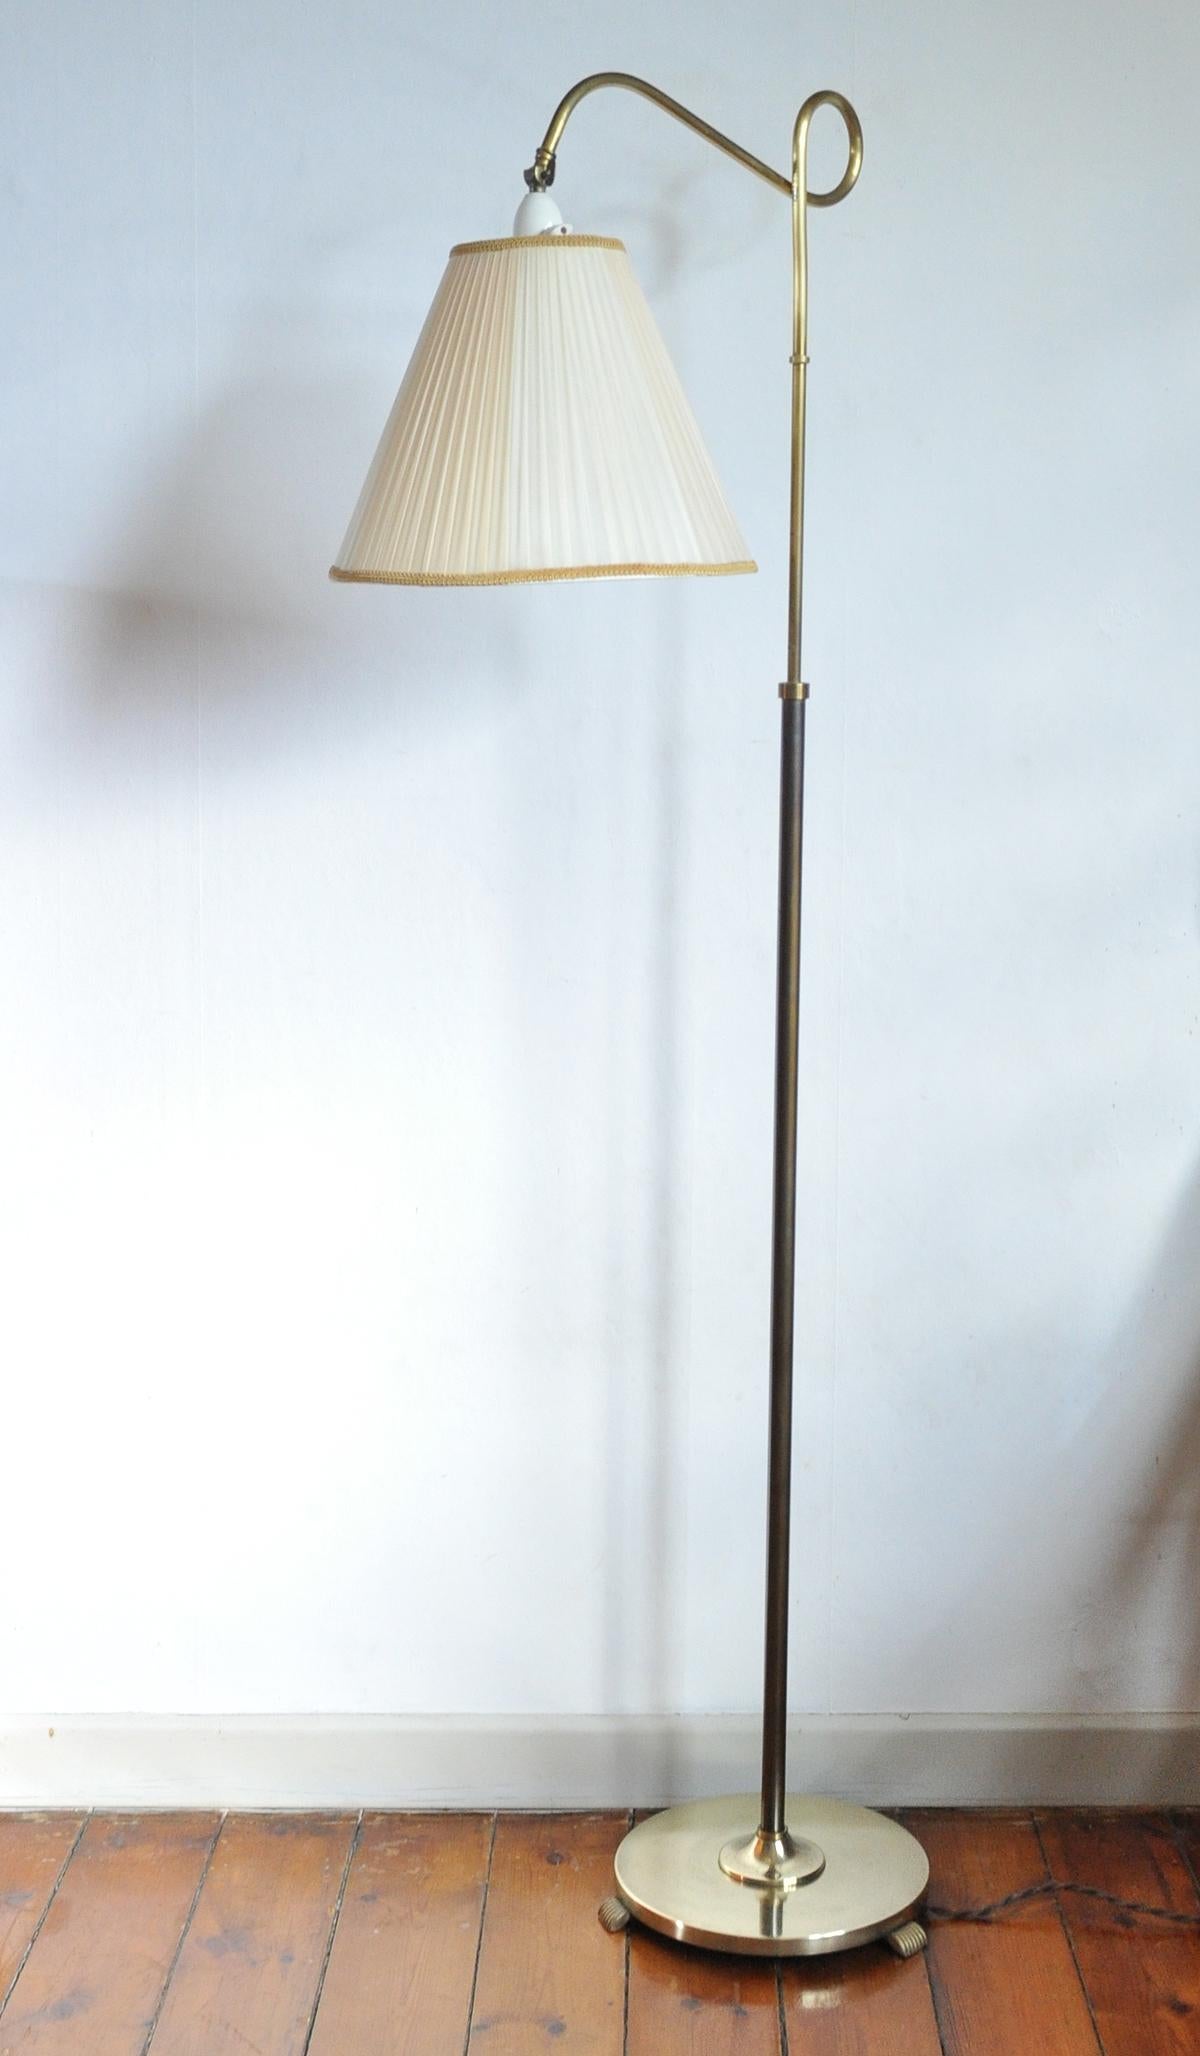 Art Deco floor lamp in brass and browned brass with original shade.
The height can be adjusted telescopically and the curved section can be rotated. Probably made by Norwegian Astra.

Signs of wear and use.
Measures: Shade size: diameter